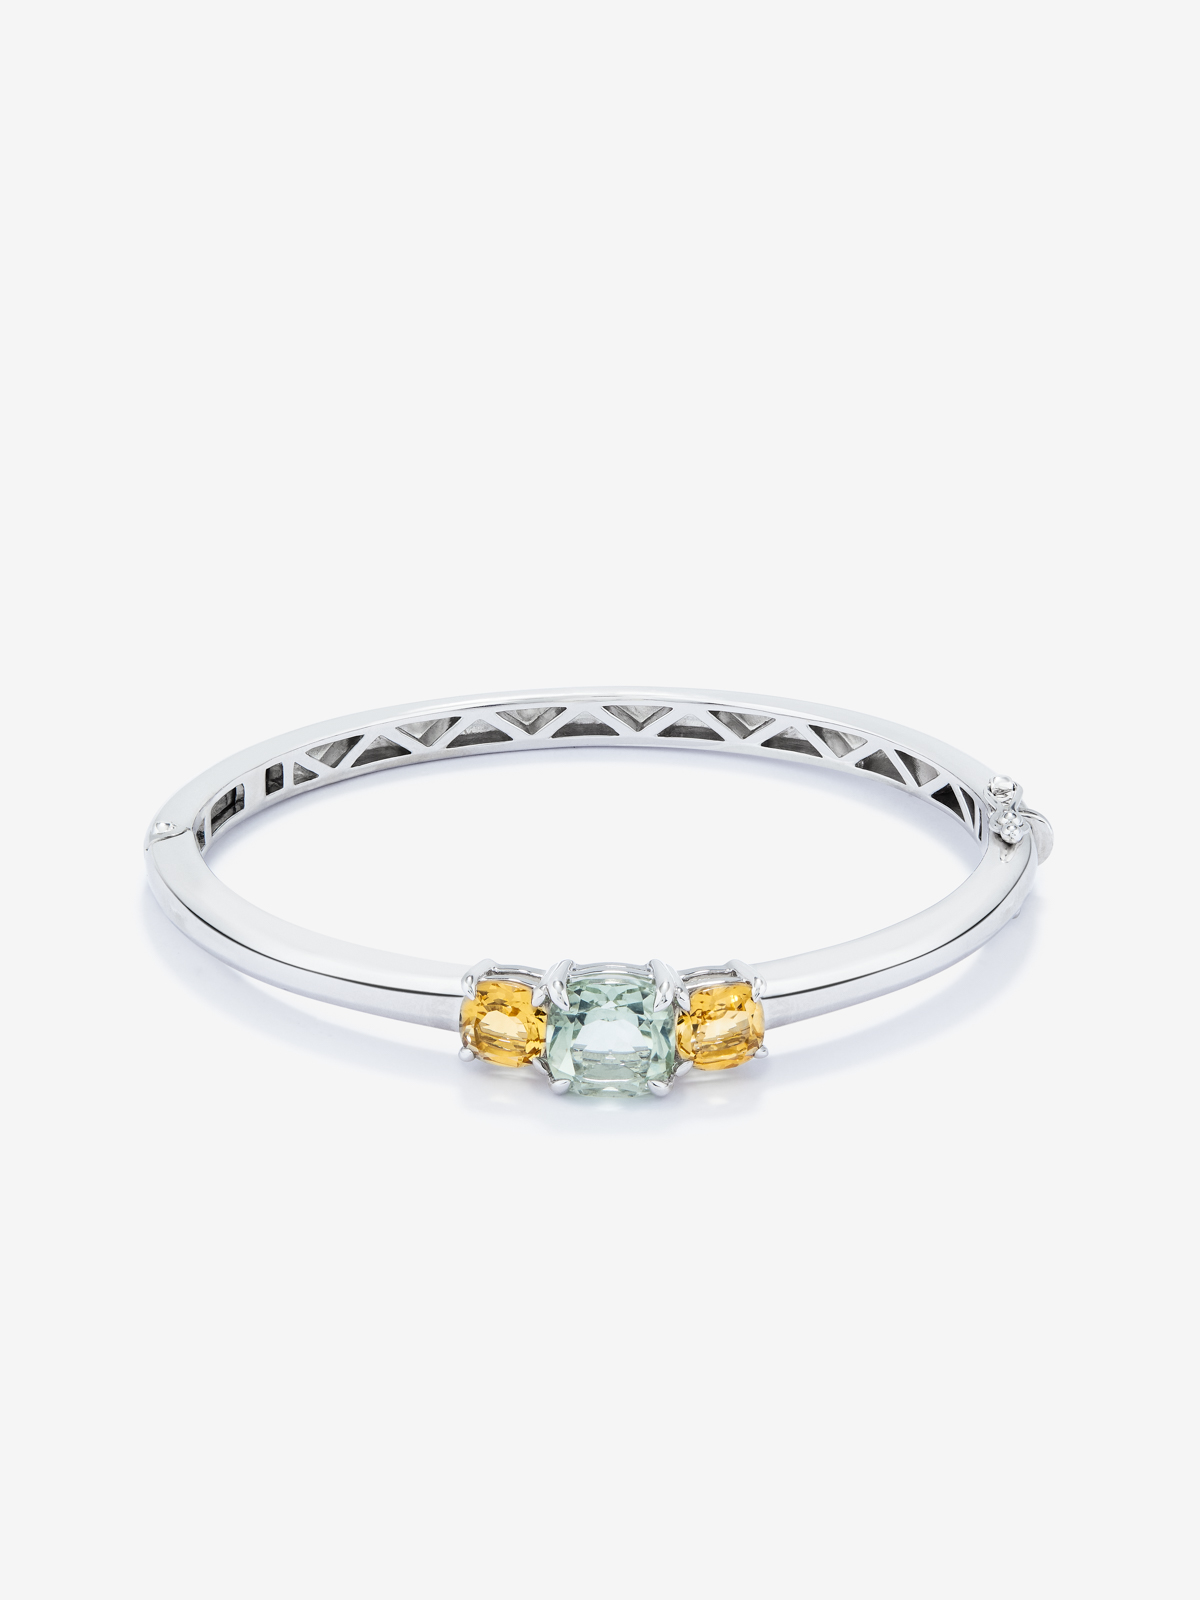 925 silver bracelet with green amethist in 2.47 cts and citrines in 1.62 CTS Cushion size Cushion